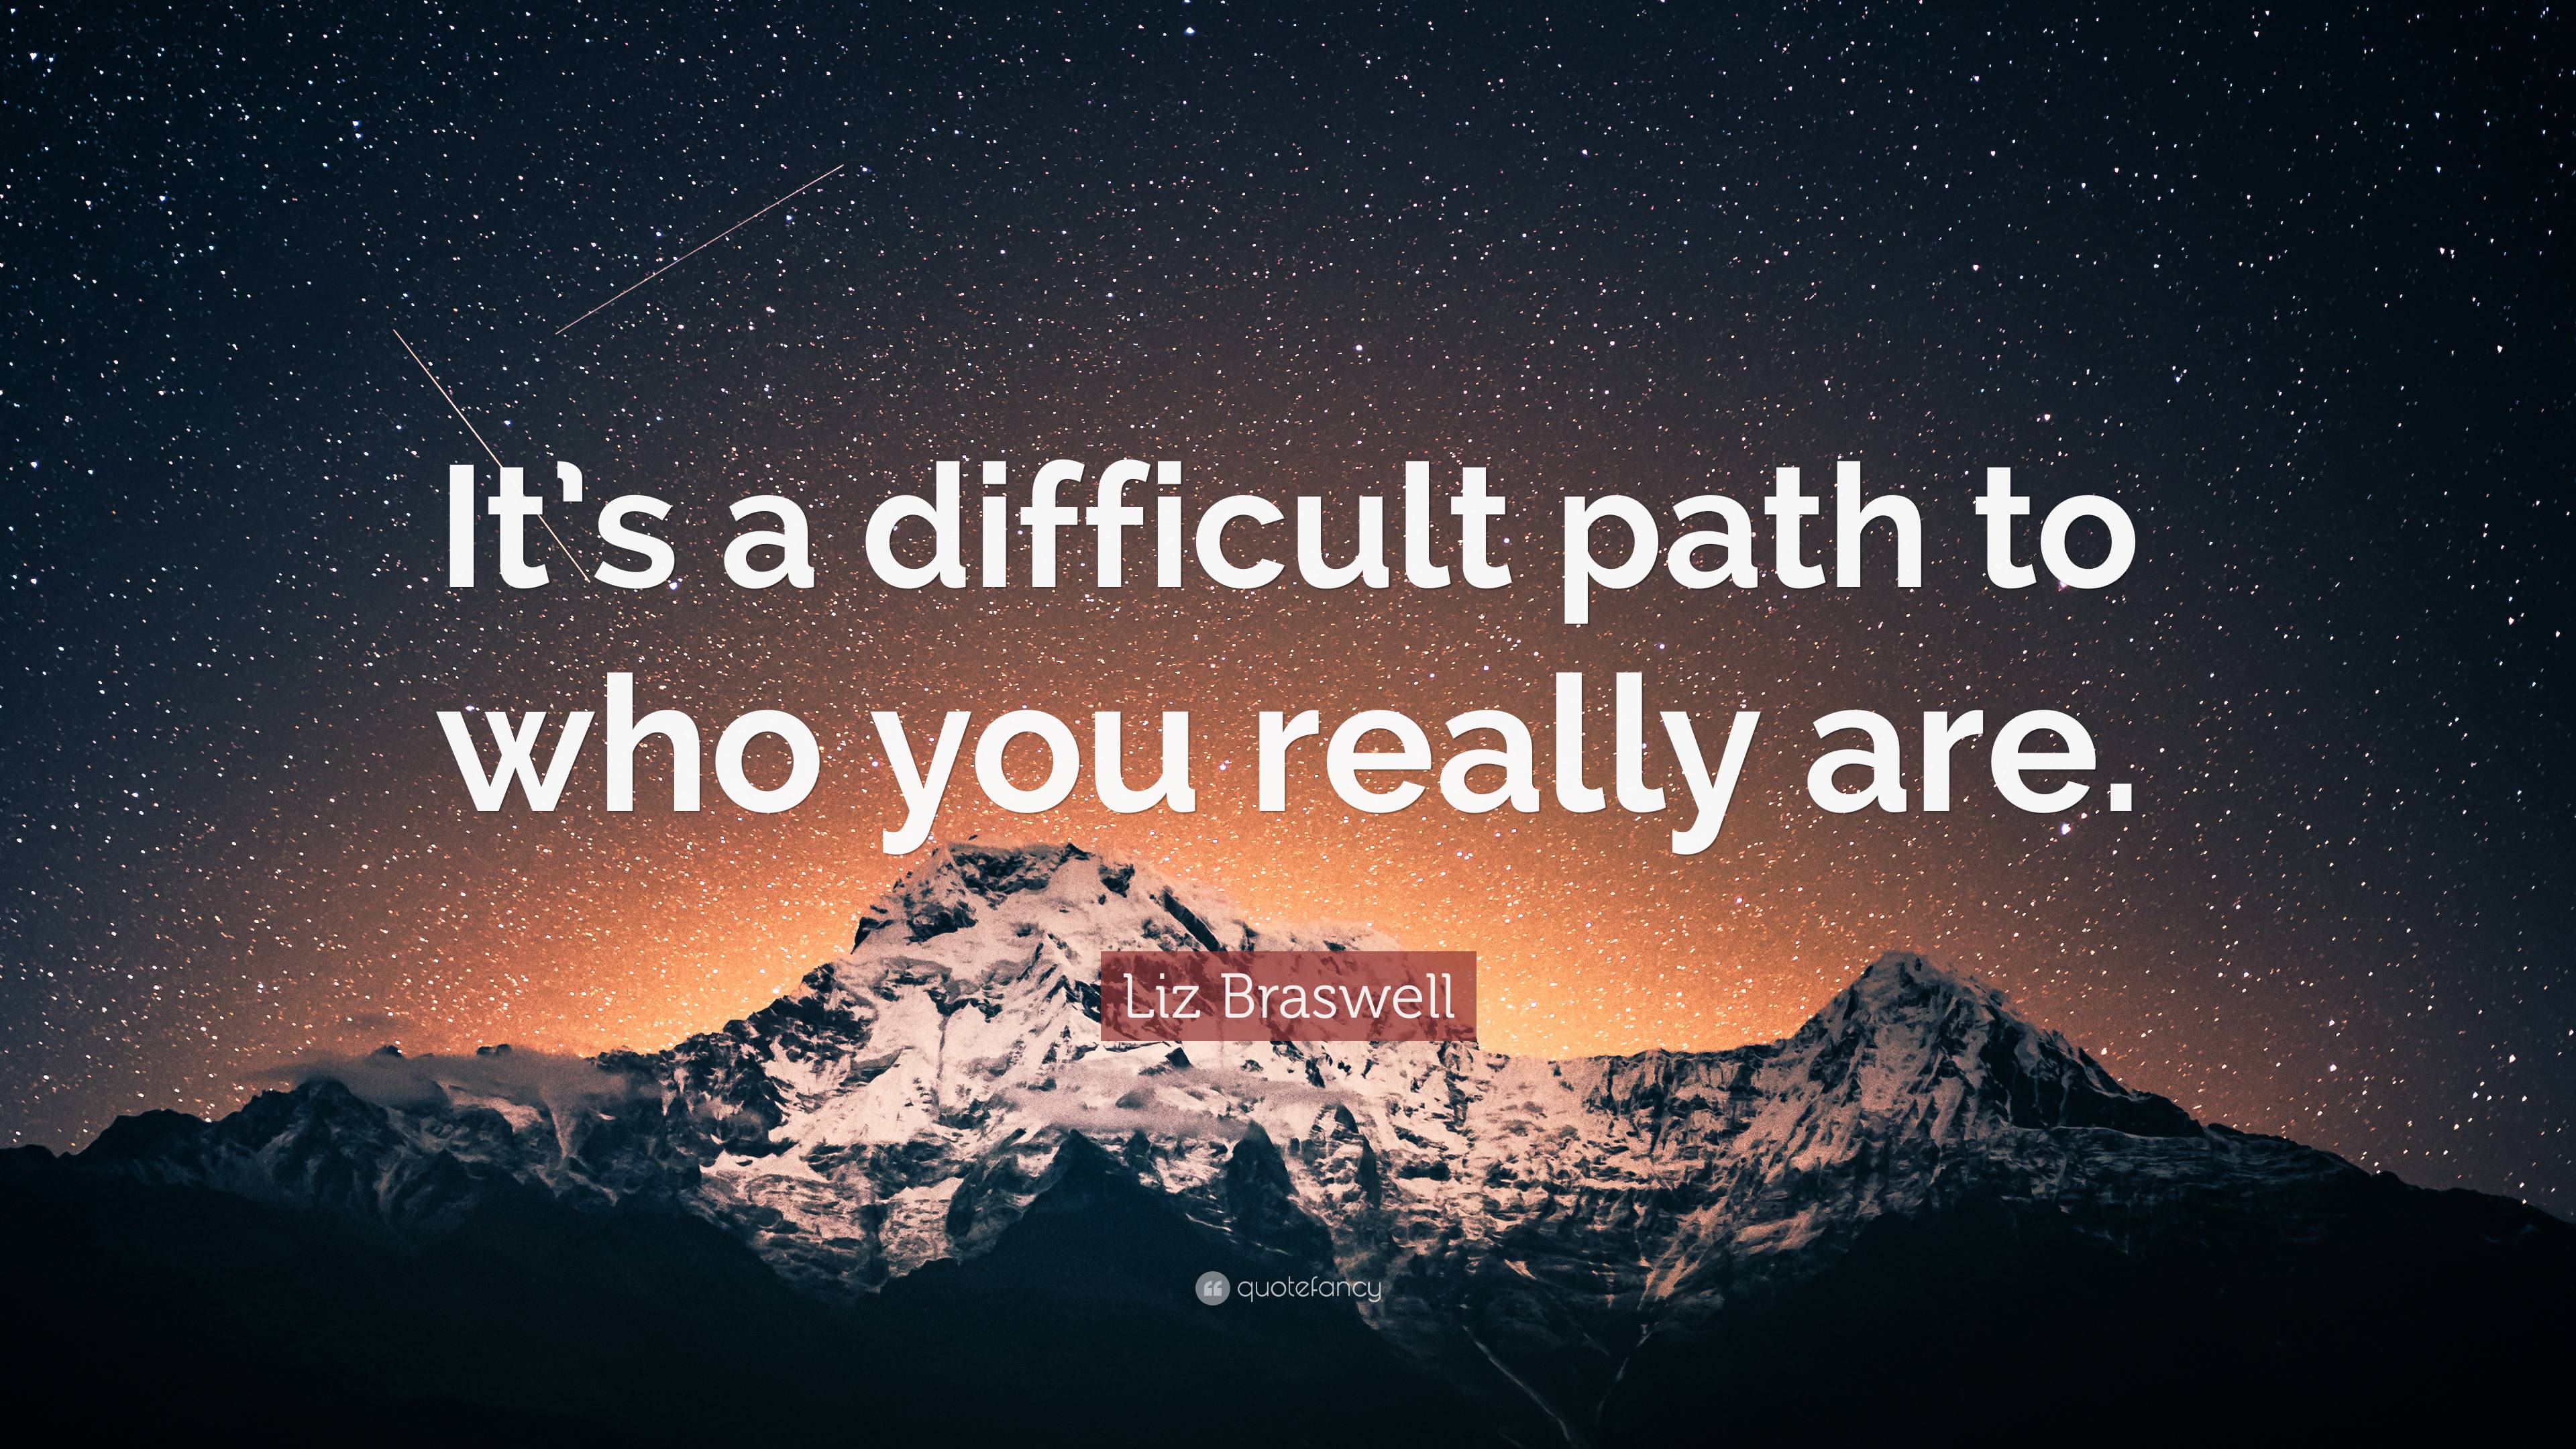 Liz Braswell Quote: “It’s a difficult path to who you really are.”